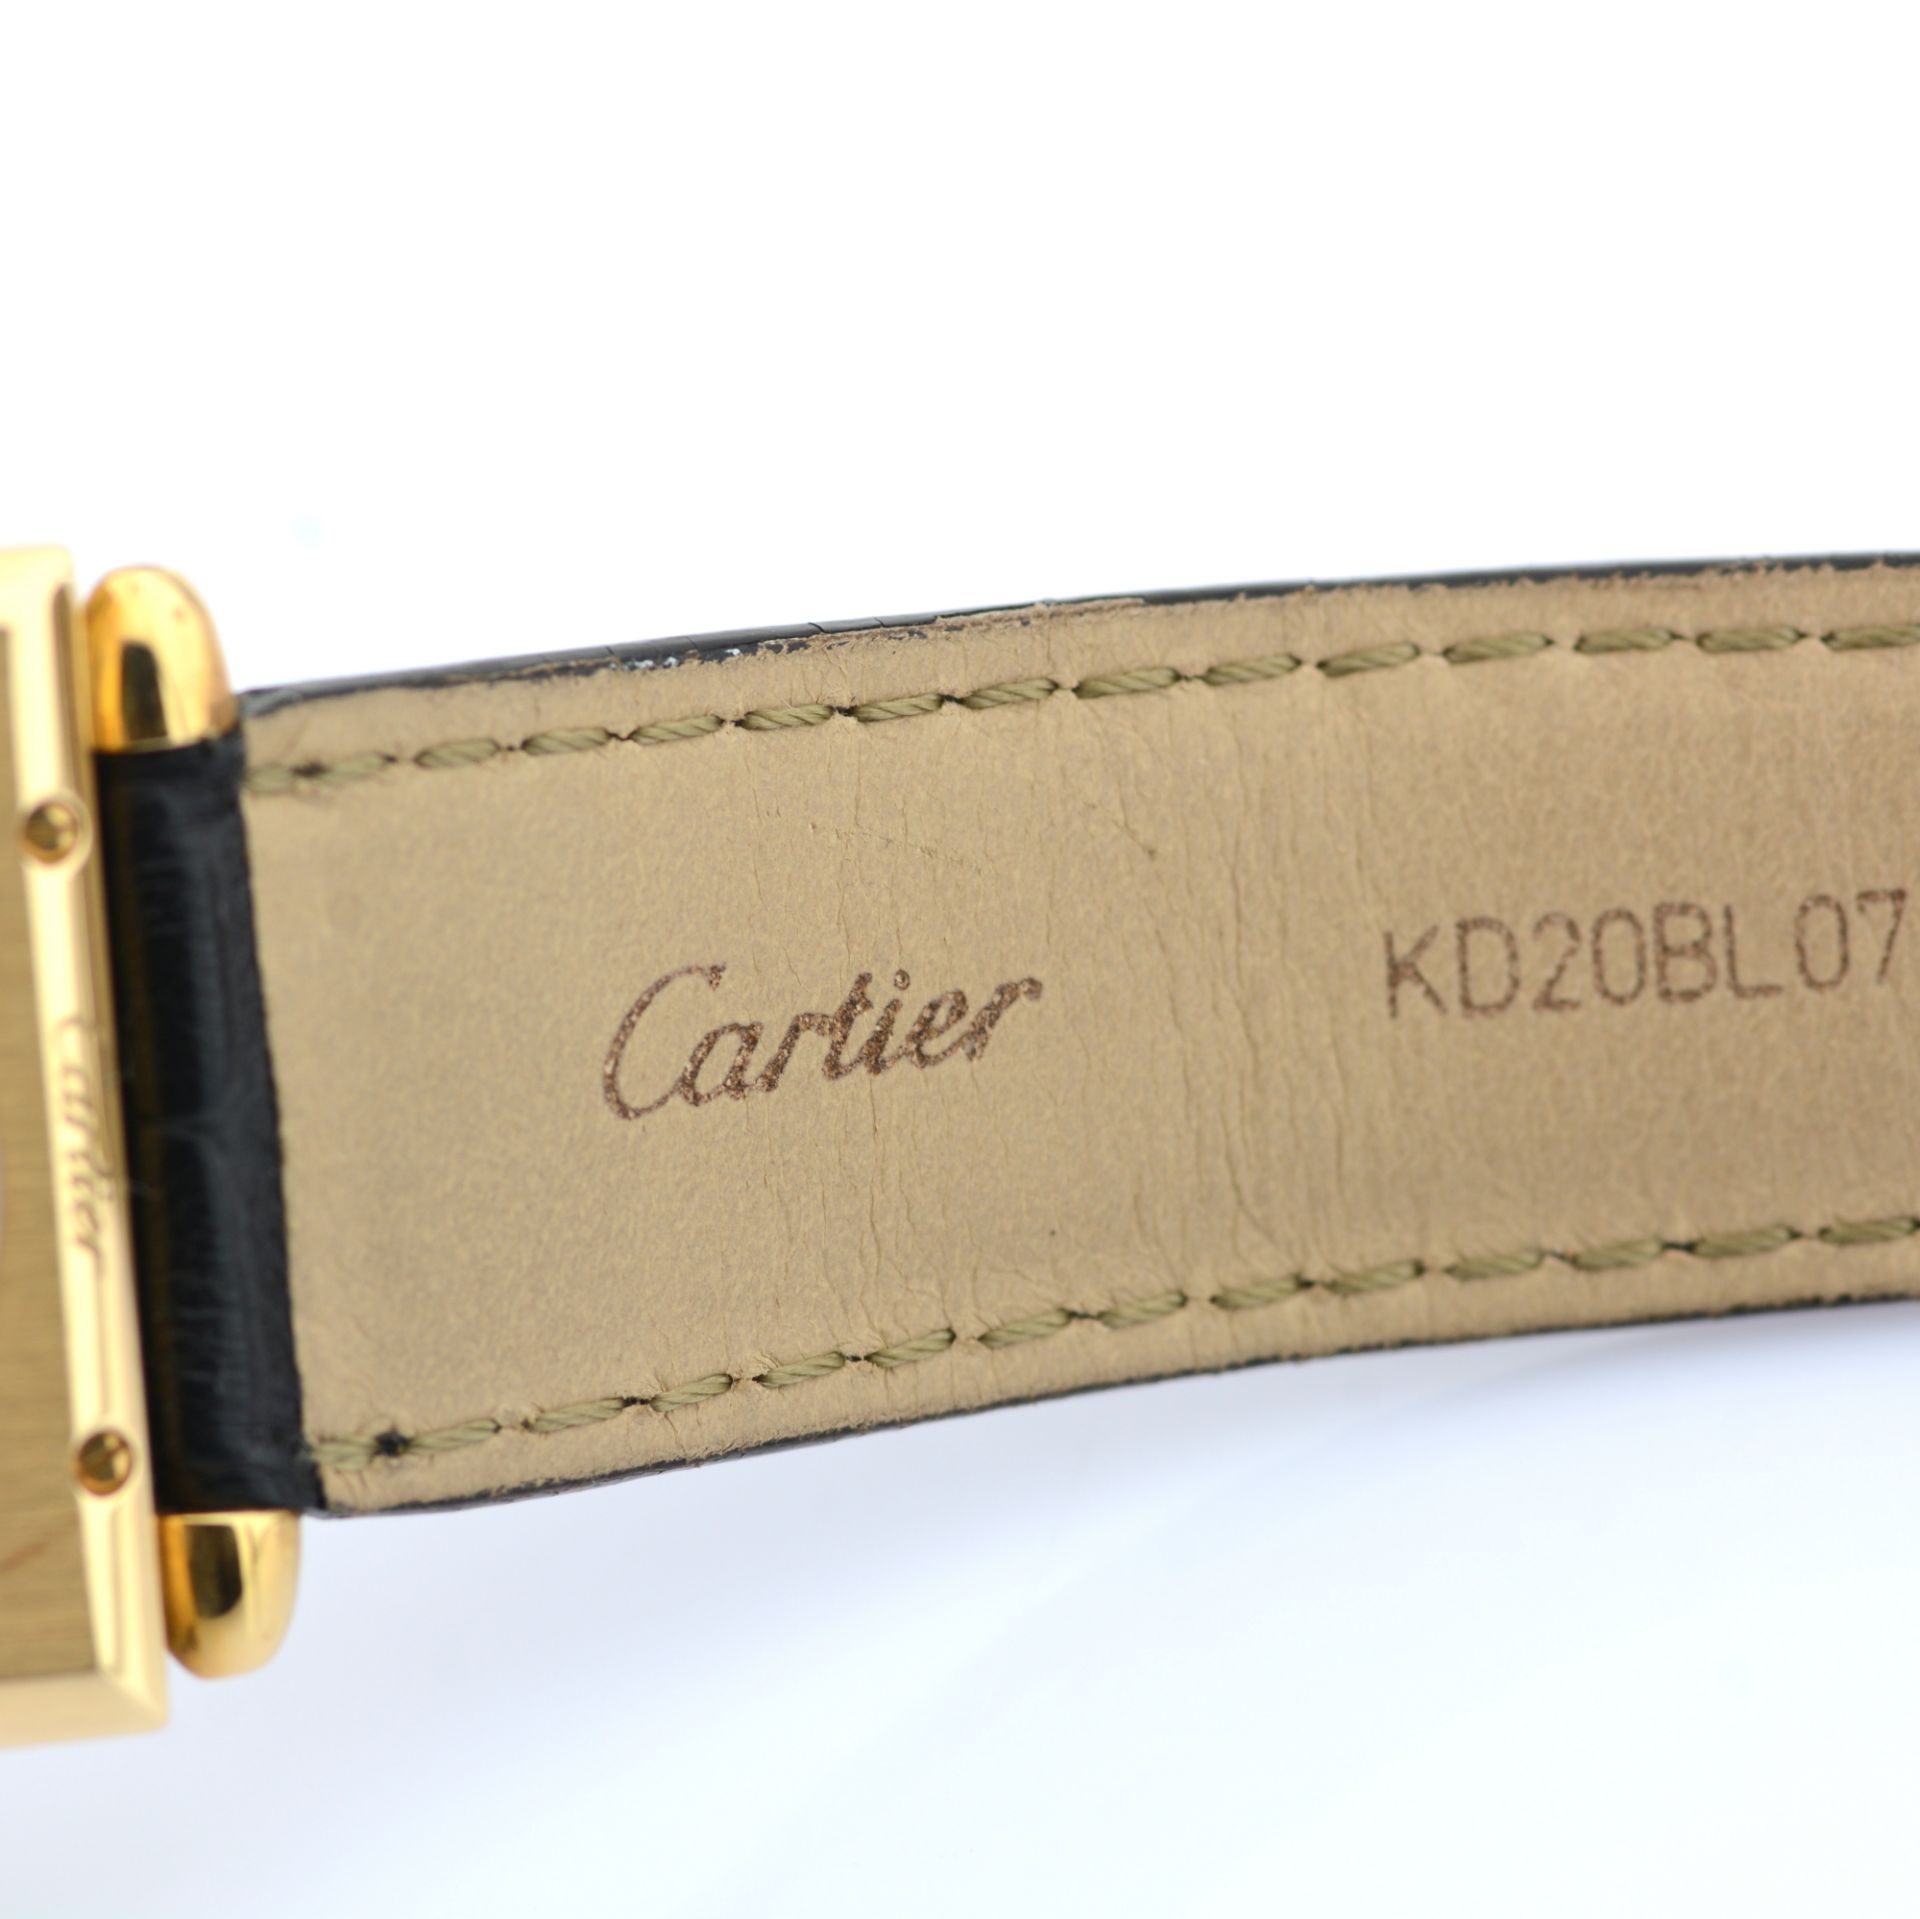 Cartier / Cartier Tank Obus Yellow Gold CPCP Mechanique - Unisex Yellow gold Wrist Watch - Image 11 of 11